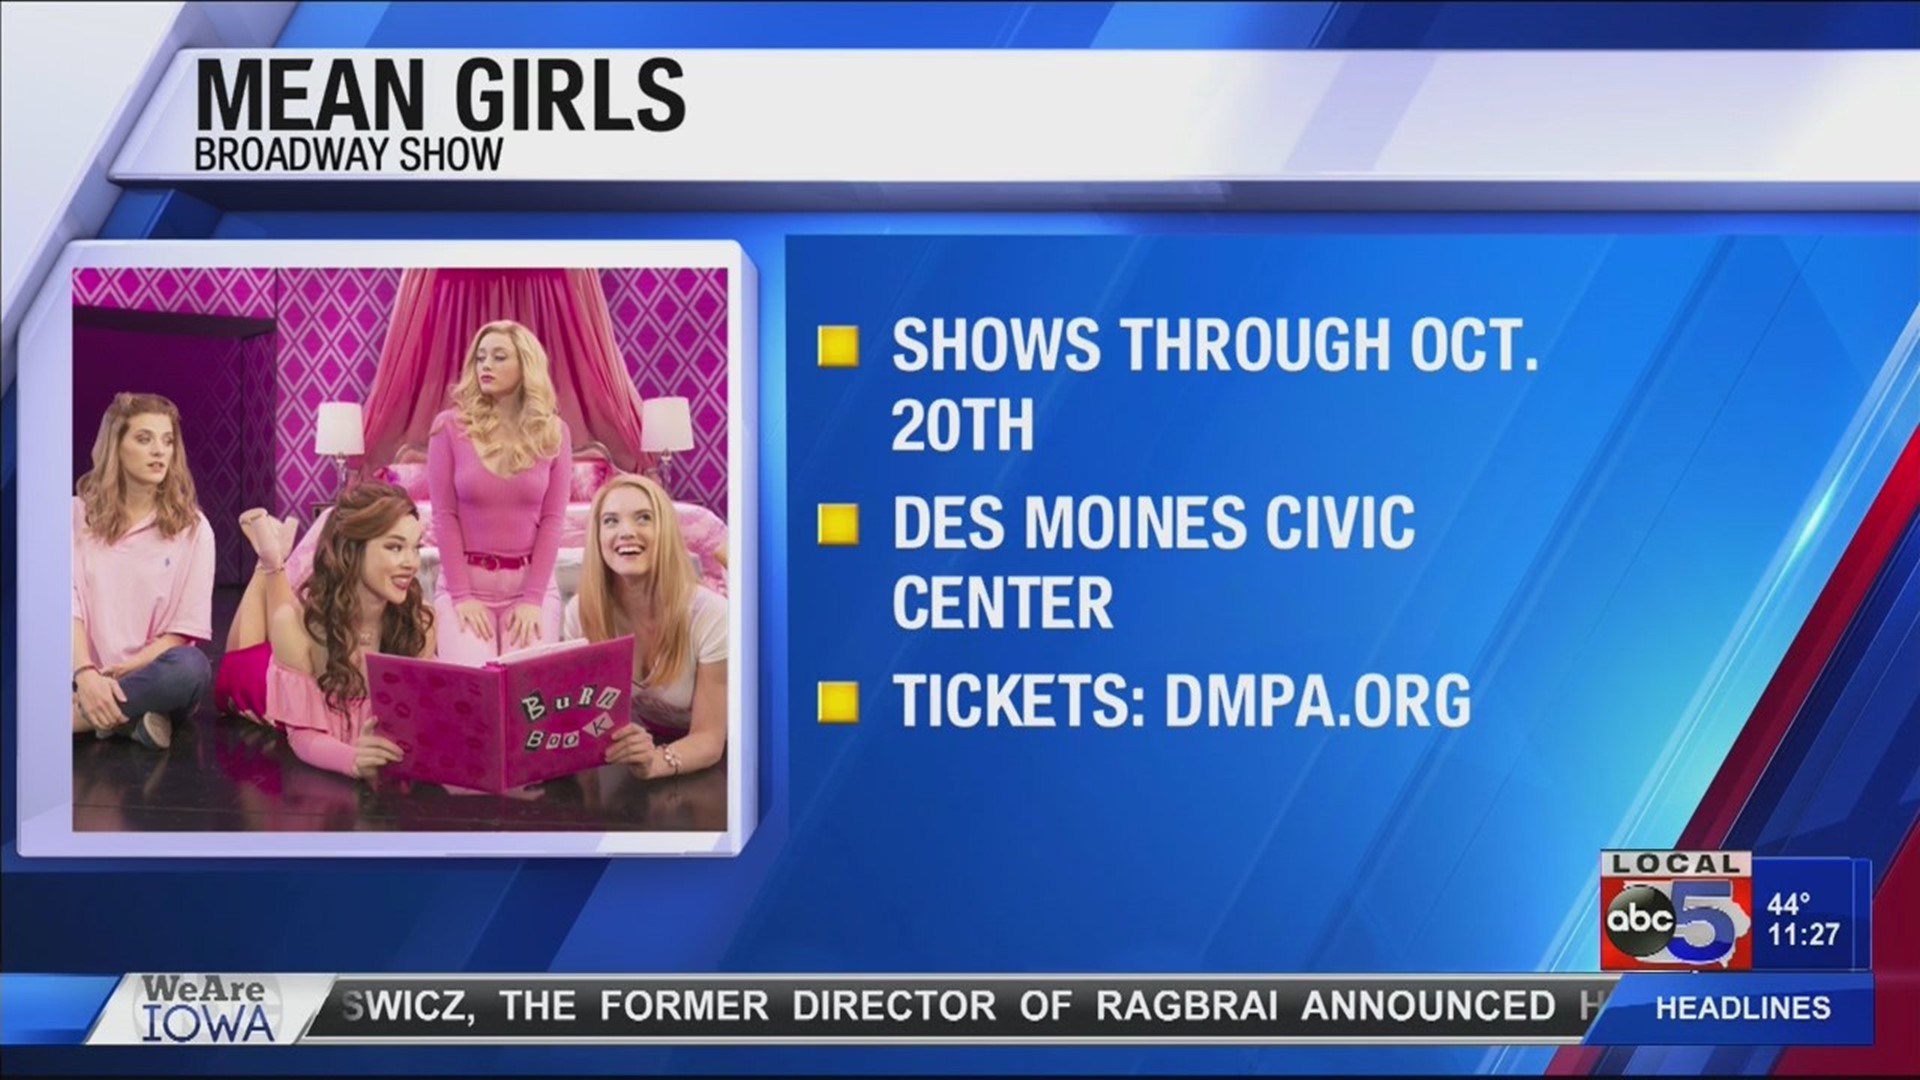 Mean Girls broadway show at the Des Moines Civic Center.